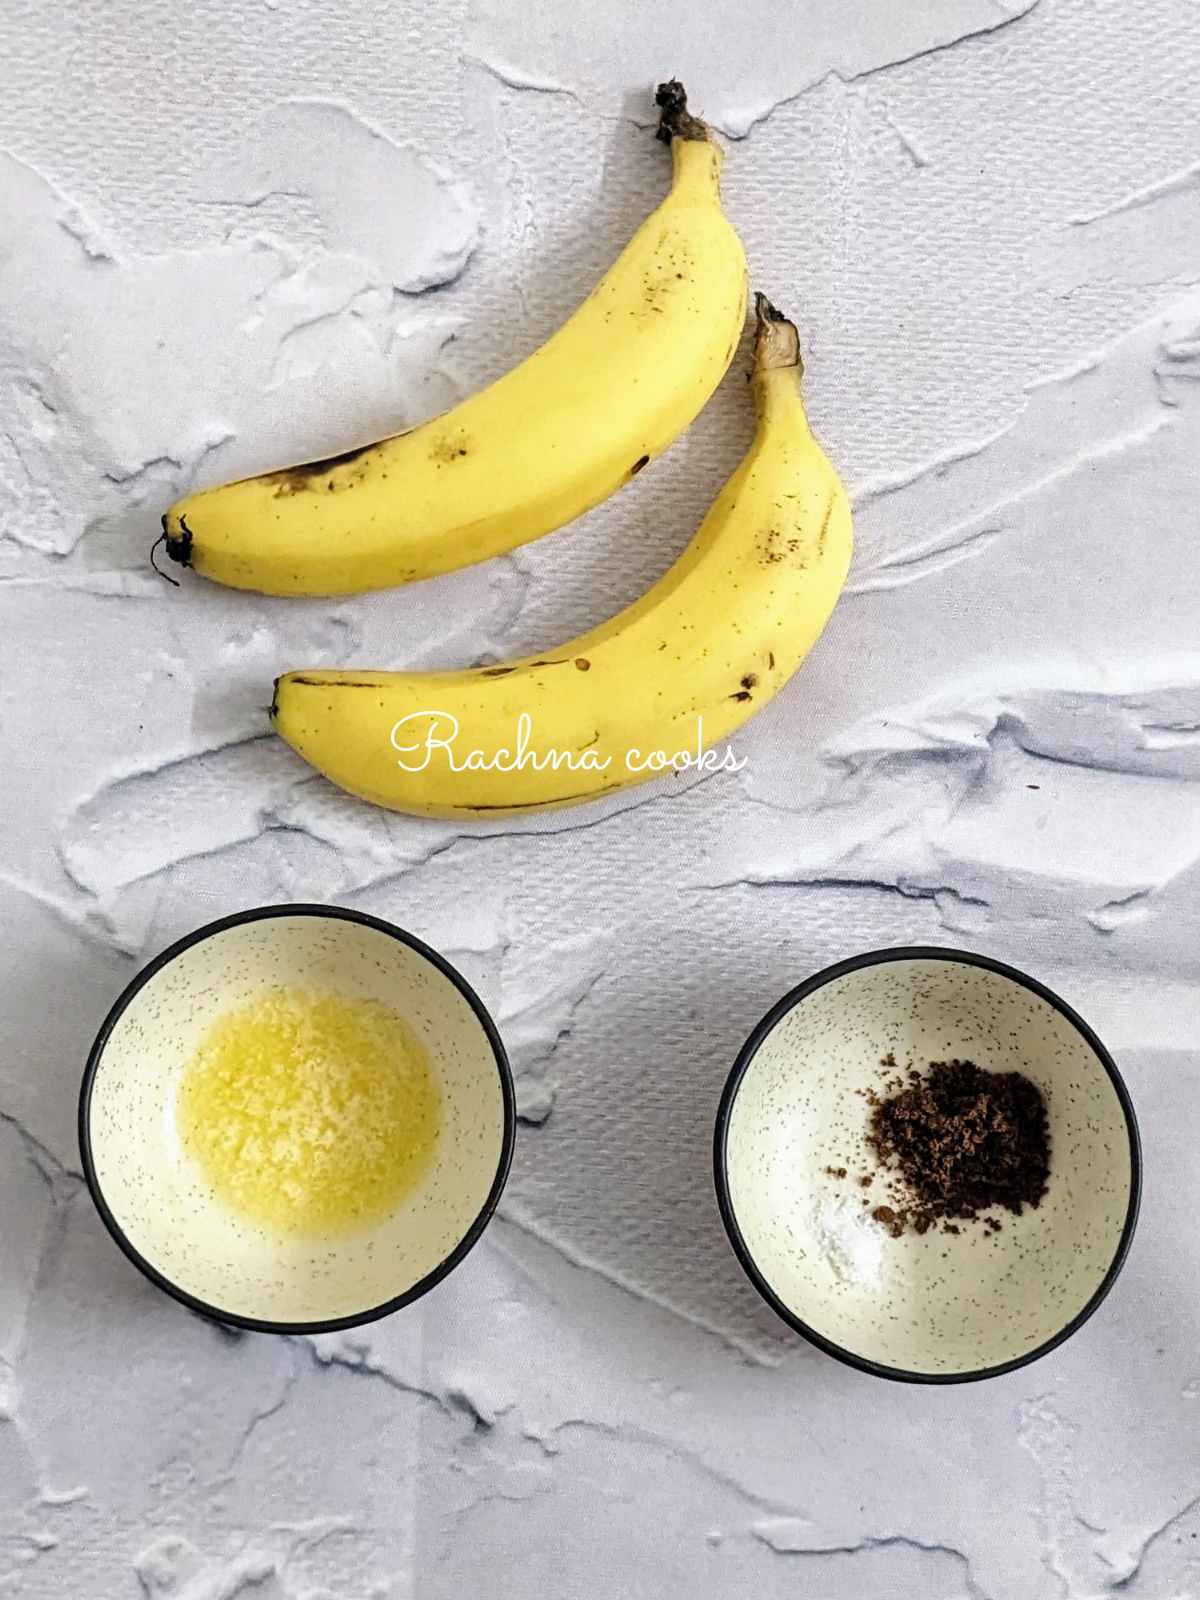 2 bananas, butter in a bowl and brown sugar with cinnamon in another bowl.